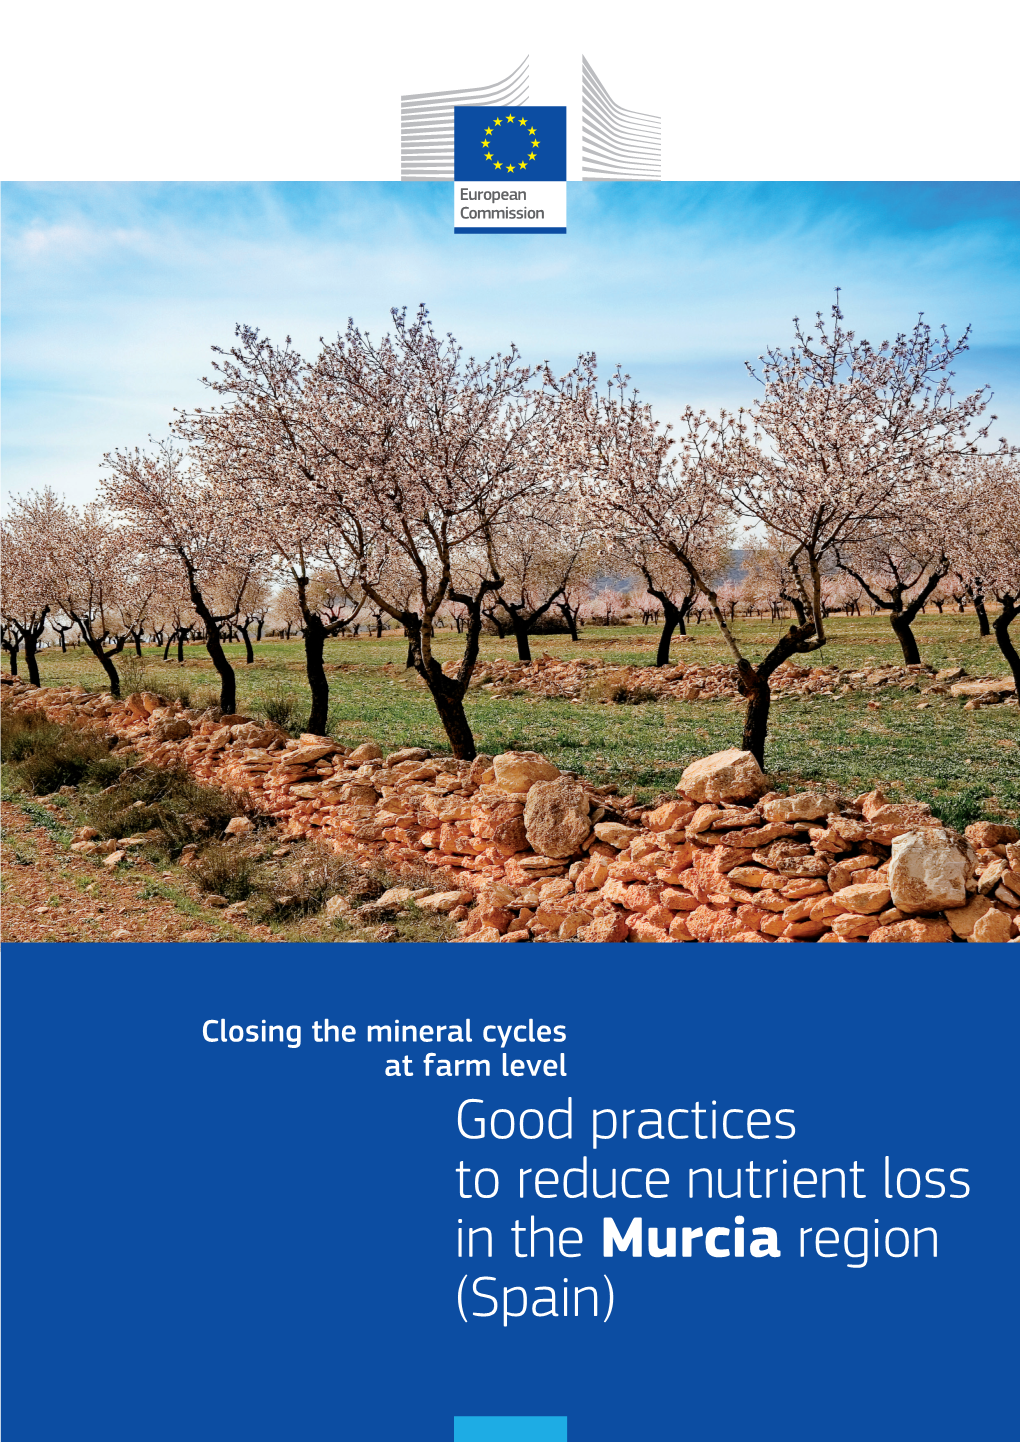 Murcia Region (Spain) 2 Closing the Mineral Cycles at Farm Level - Good Practices to Reduce Nutrient Loss in the Murcia Region (Spain)